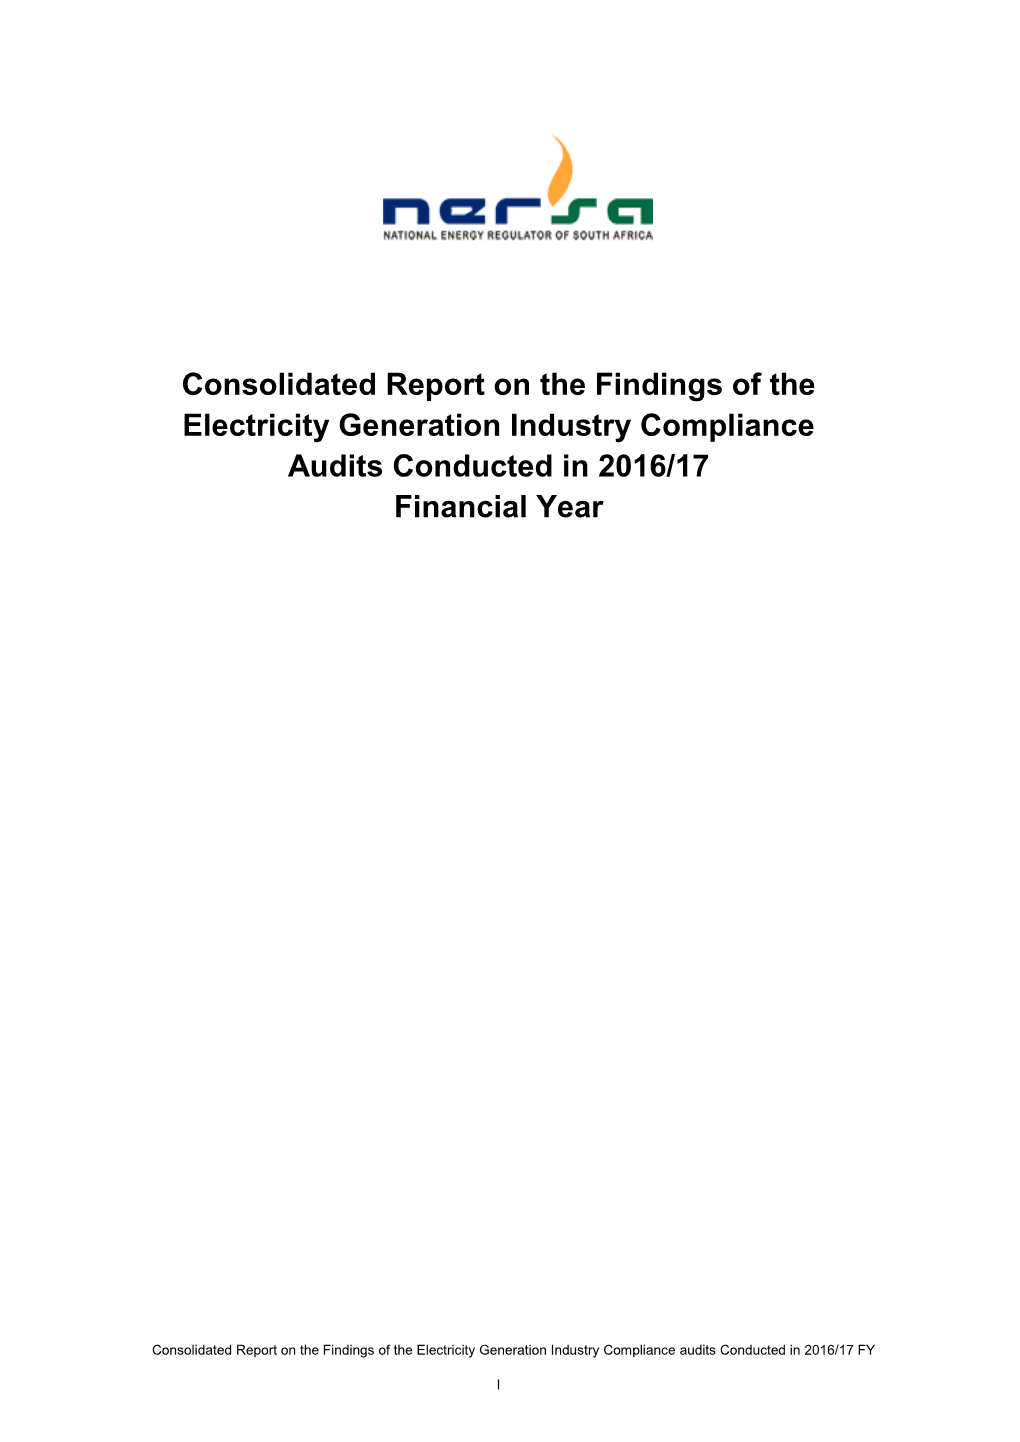 Consolidated Report on the Findings of the Electricity Generation Industry Compliance Audits Conducted in 2016/17 Financial Year